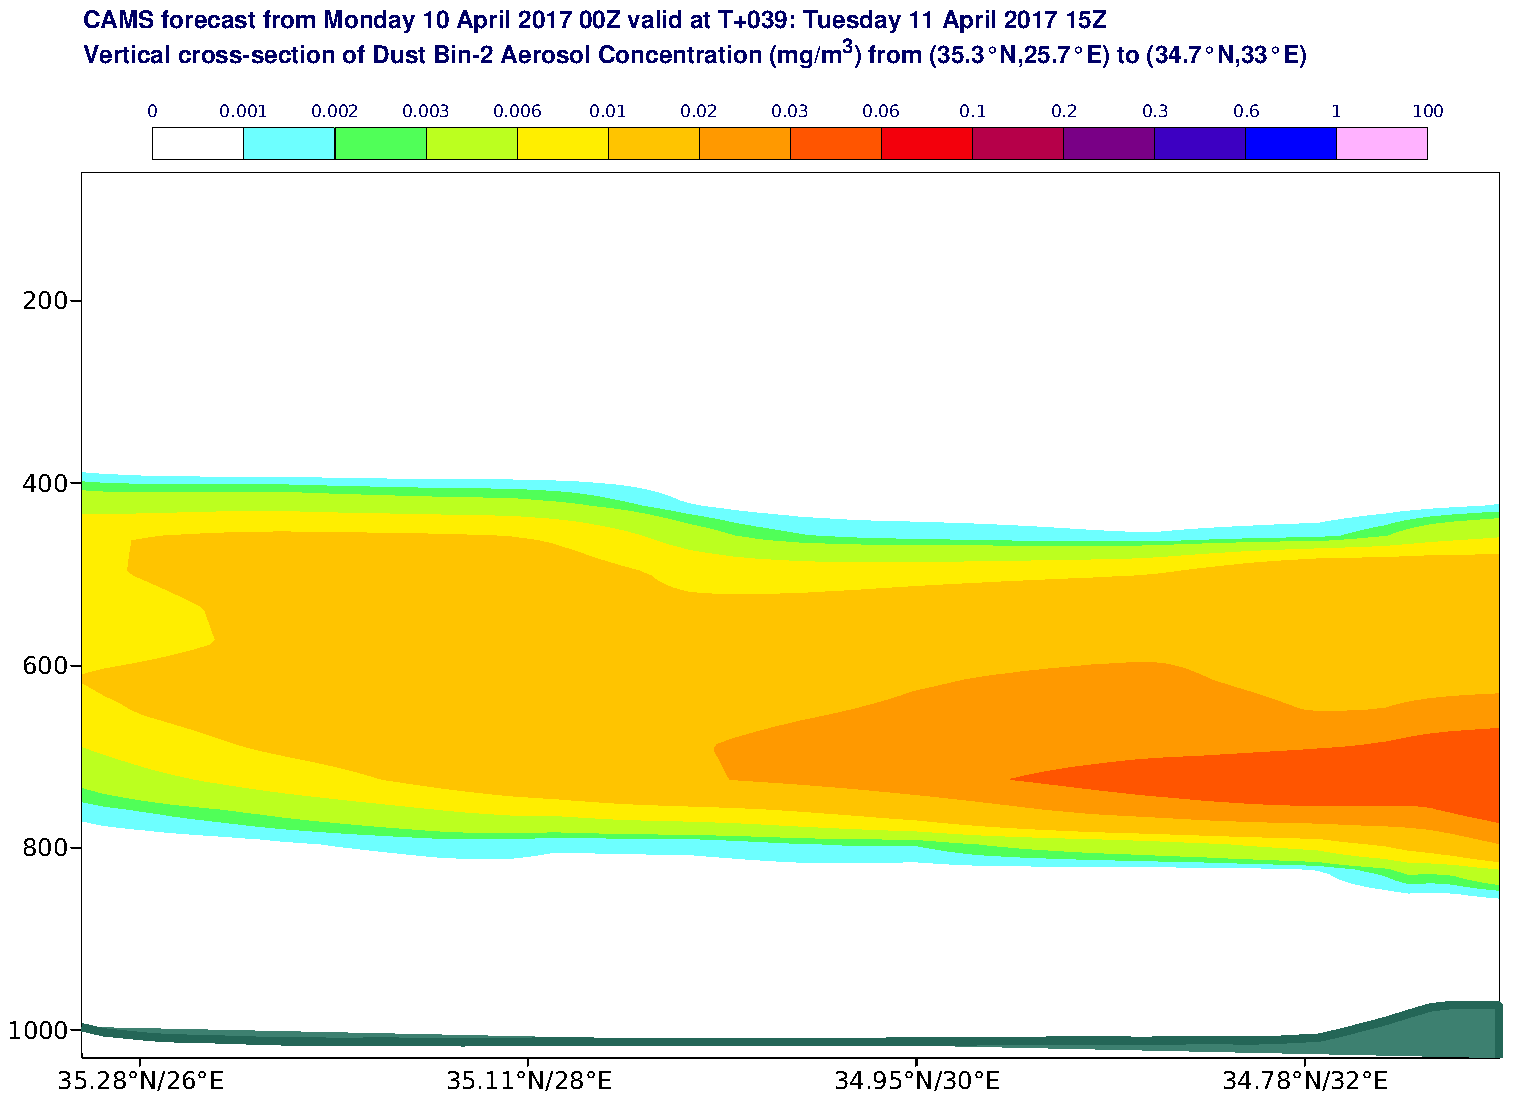 Vertical cross-section of Dust Bin-2 Aerosol Concentration (mg/m3) valid at T39 - 2017-04-11 15:00